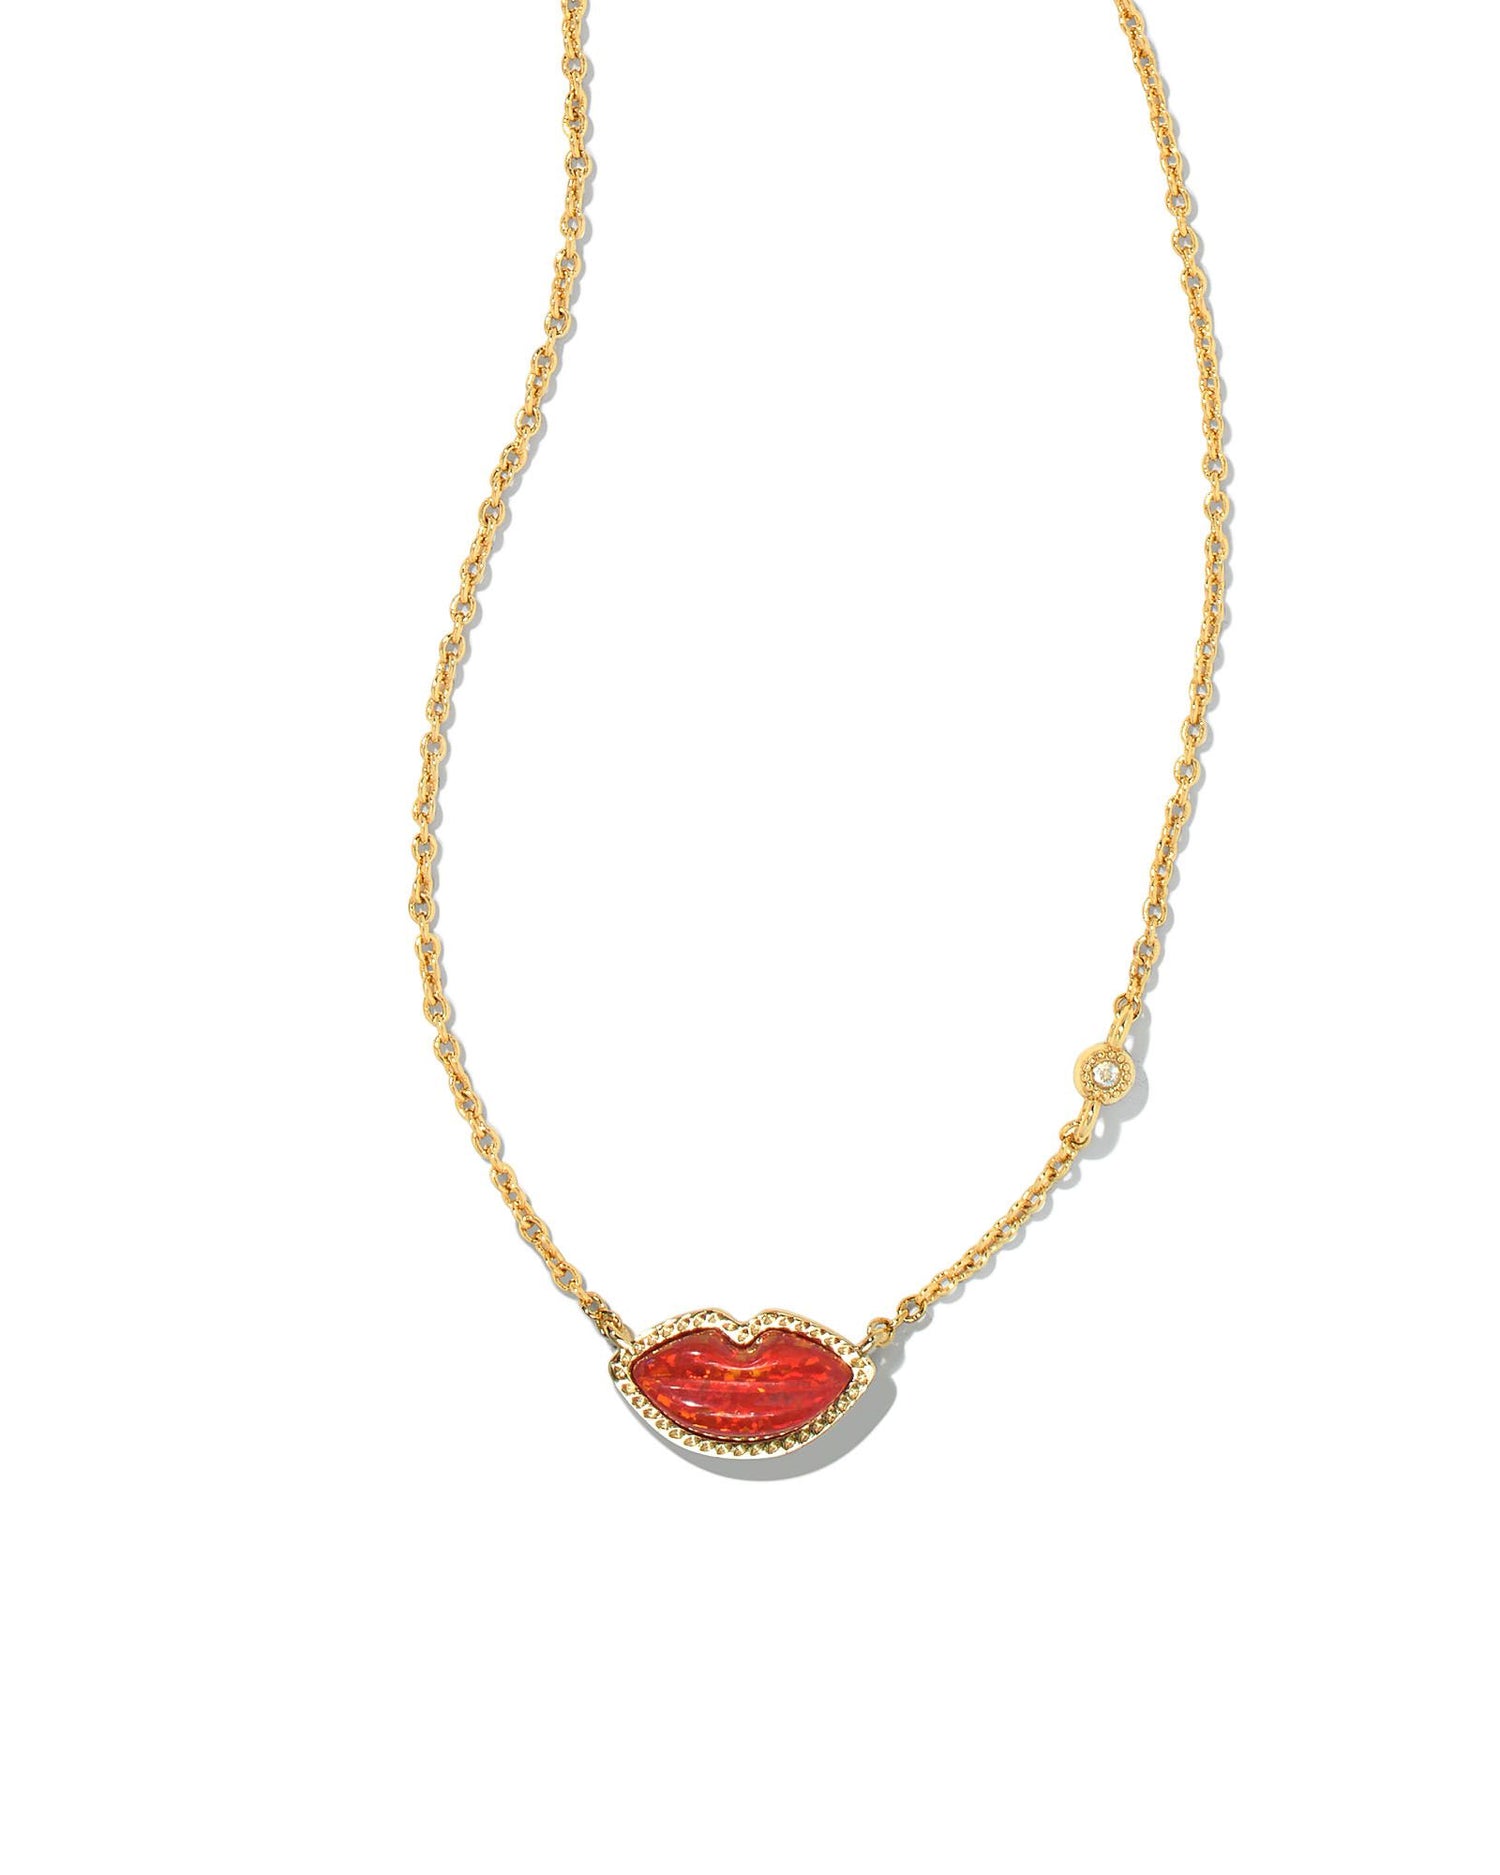 Kendra Scott Elisa Gold Necklace in Cherry Red Illusion | 4217704854 |  Borsheims